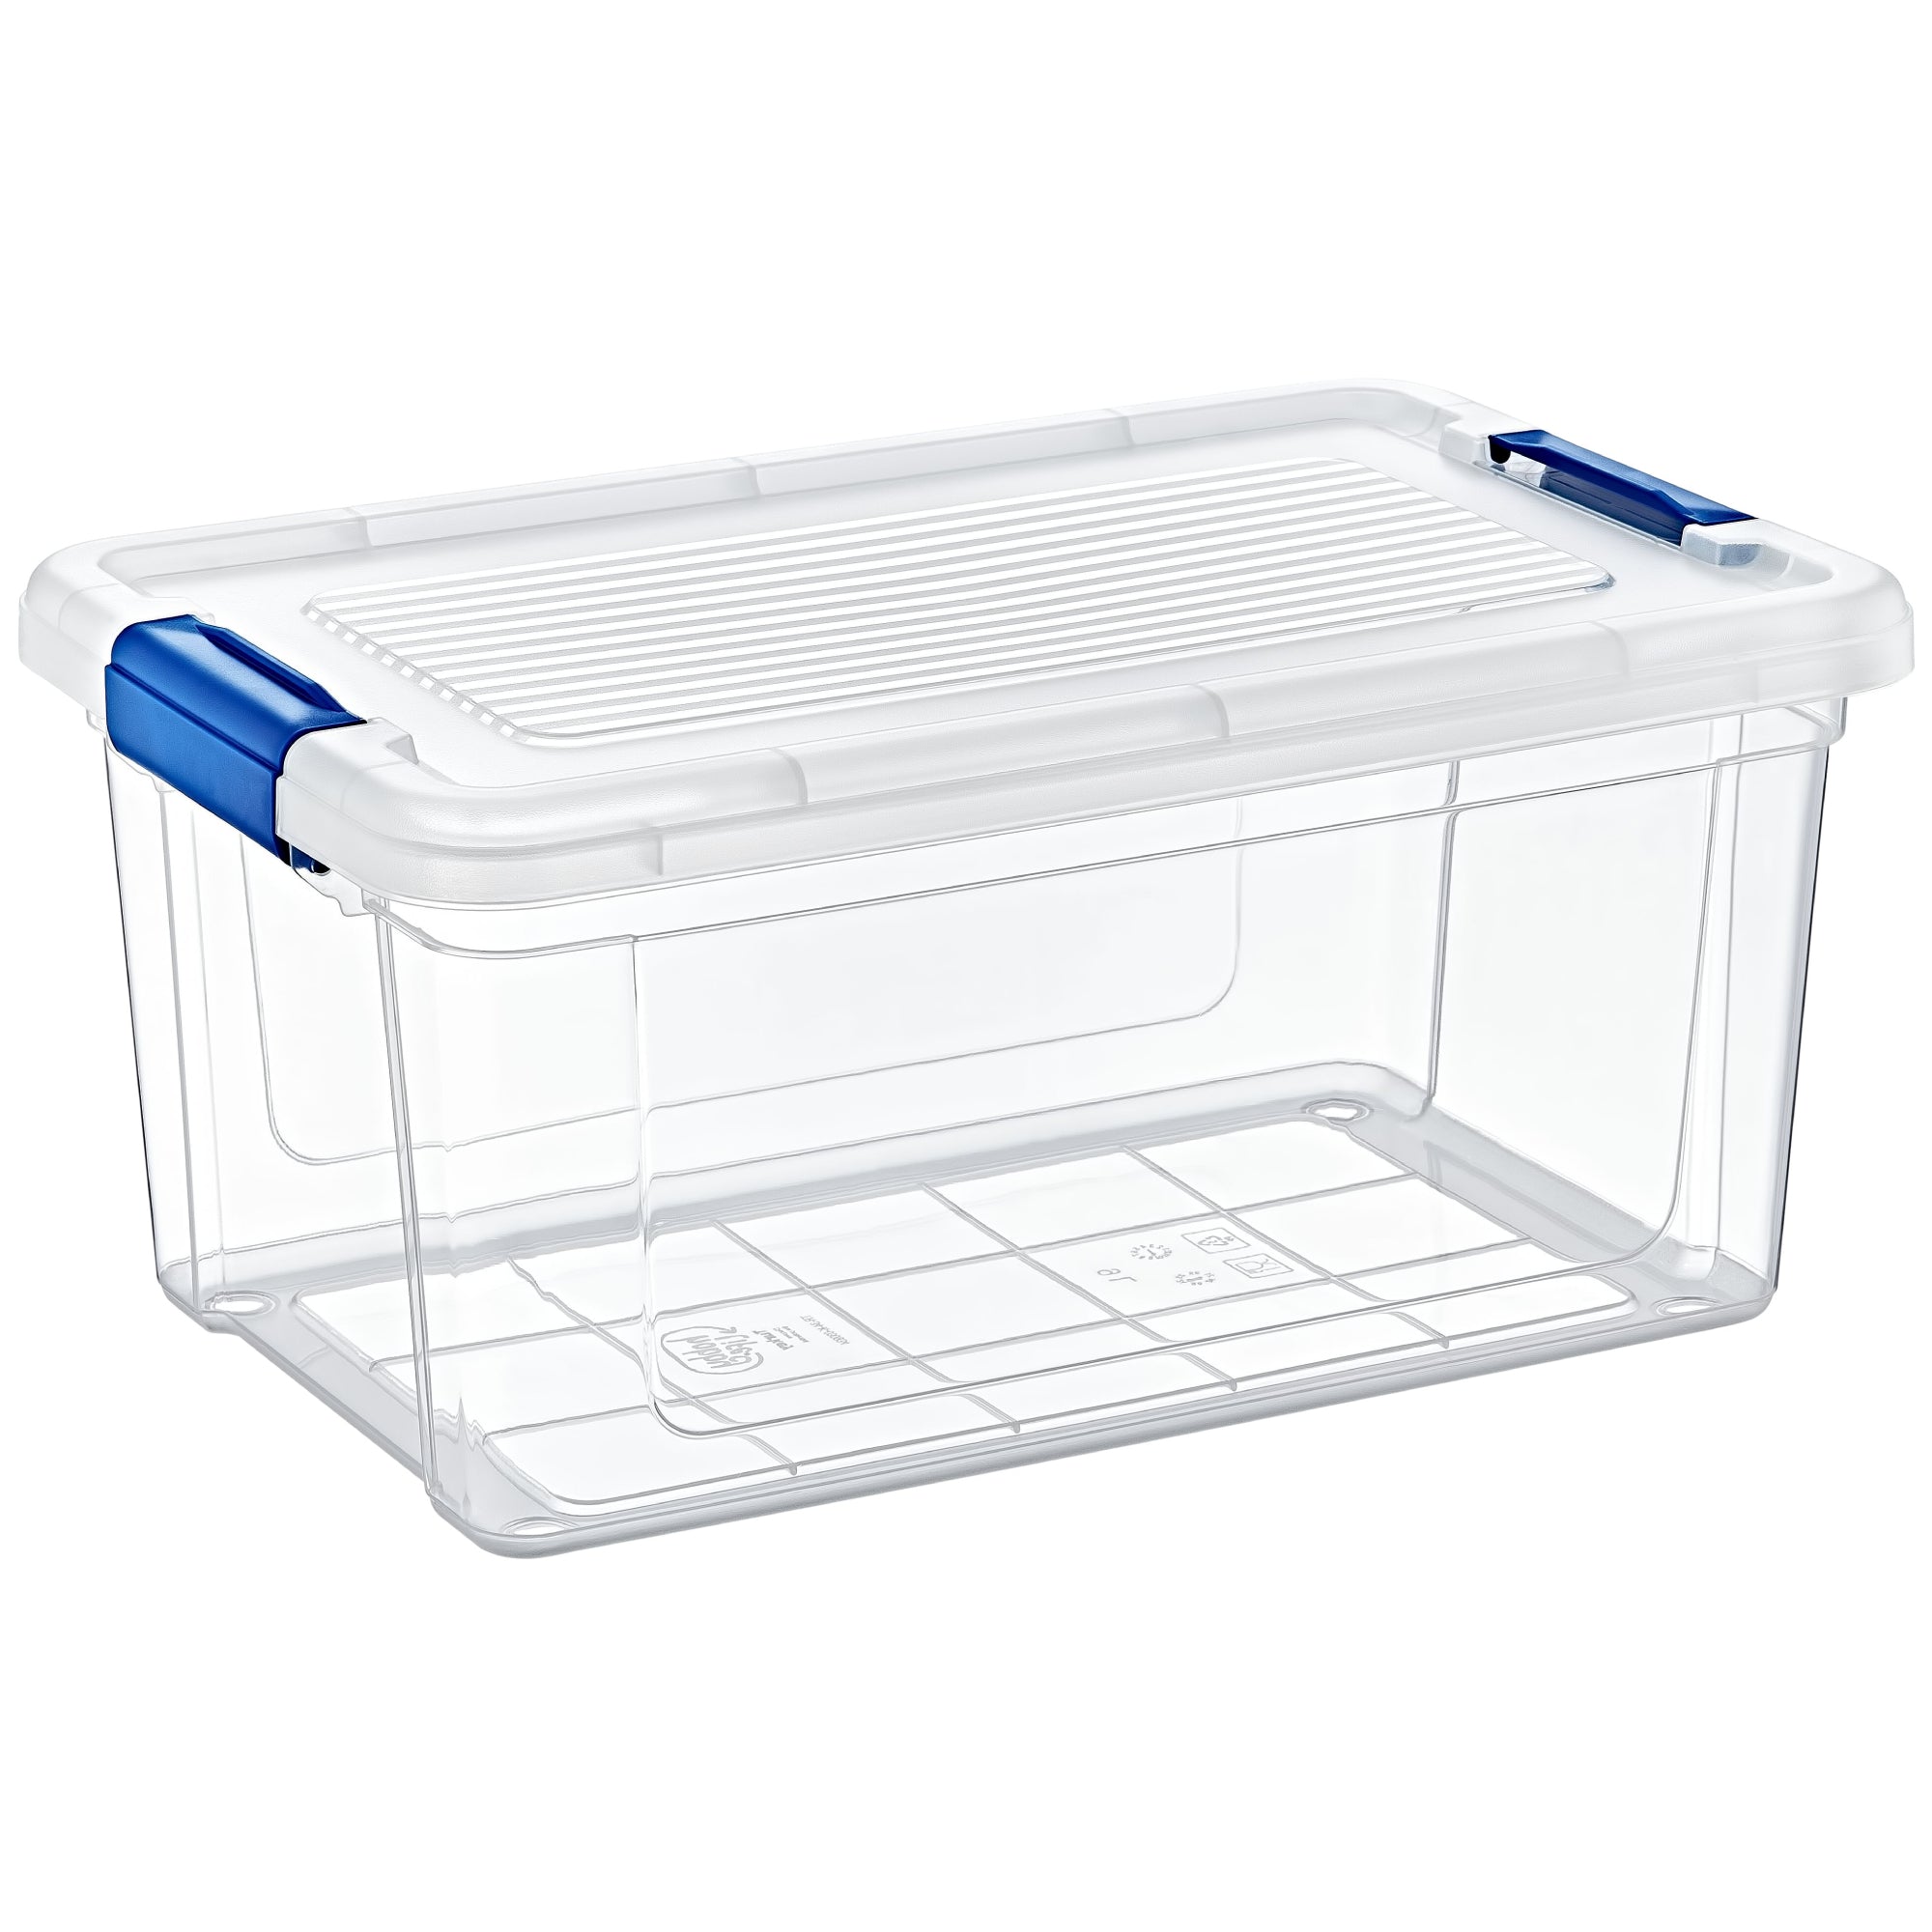 Hobby Life Plastic Storage Utility Container Box 9L Stormax Glassy 021222